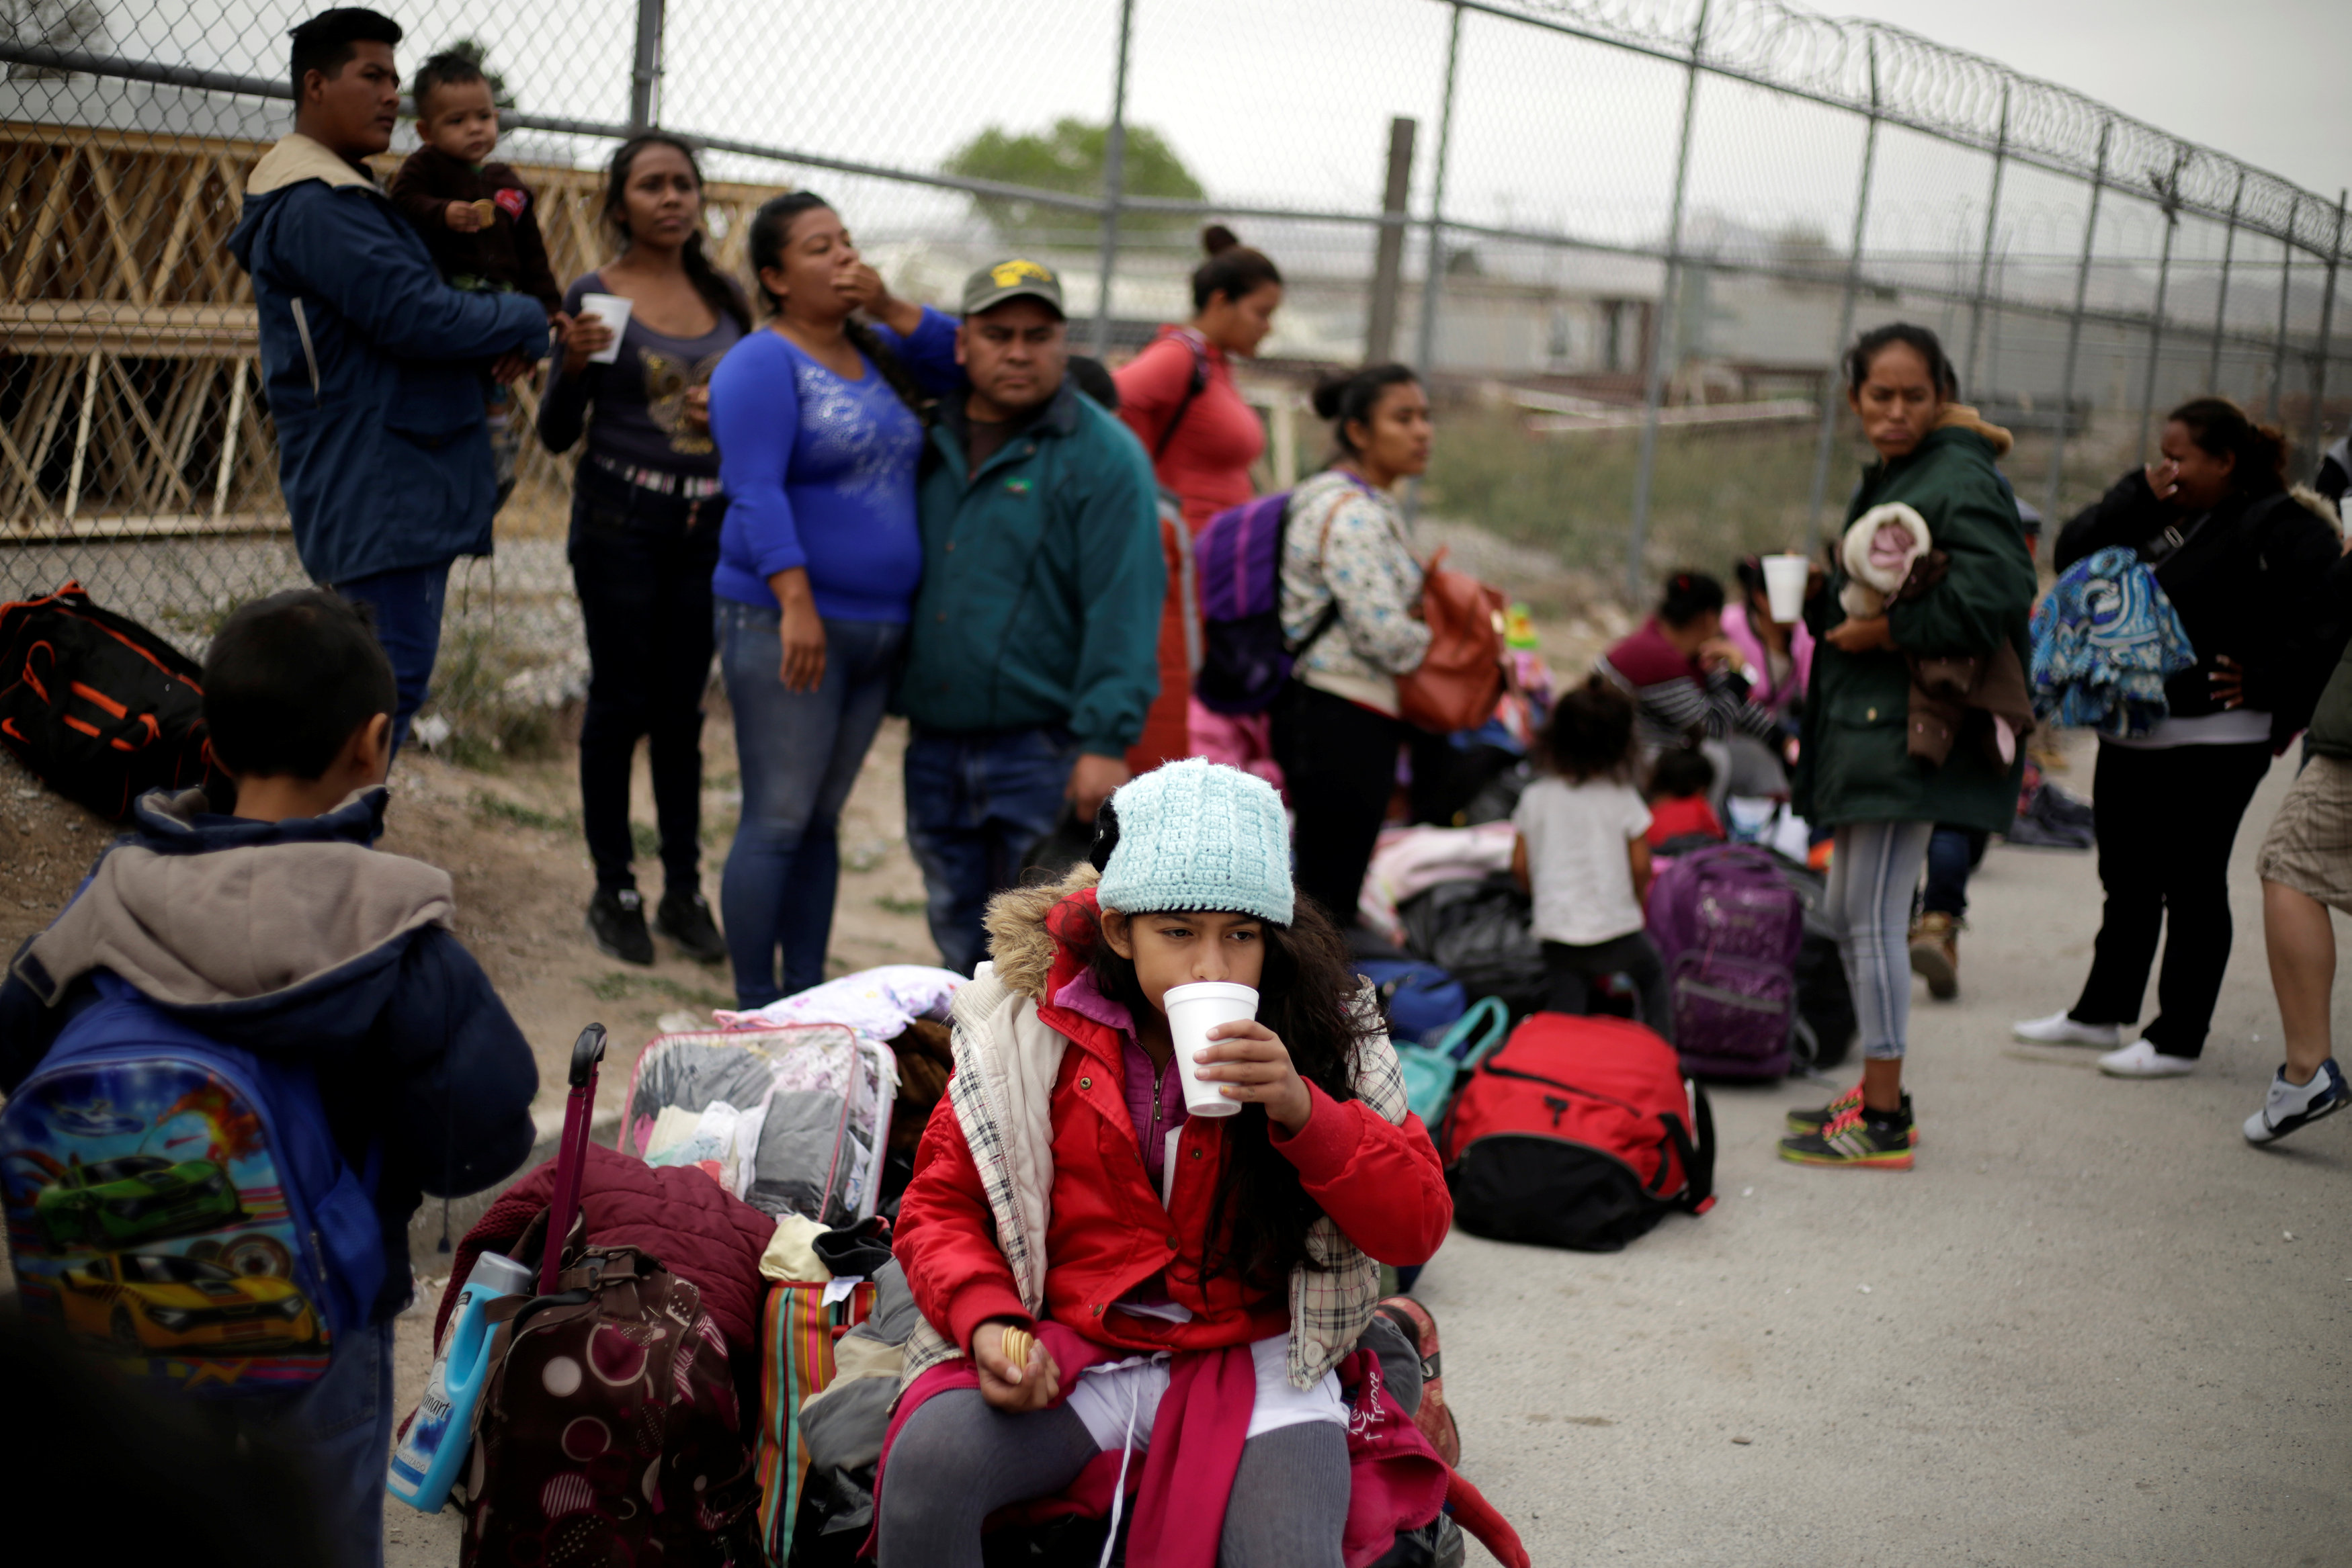 2019-03-07T222935Z_626335465_RC14554088D0_RTRMADP_3_USA-IMMIGRATION-MEXICO